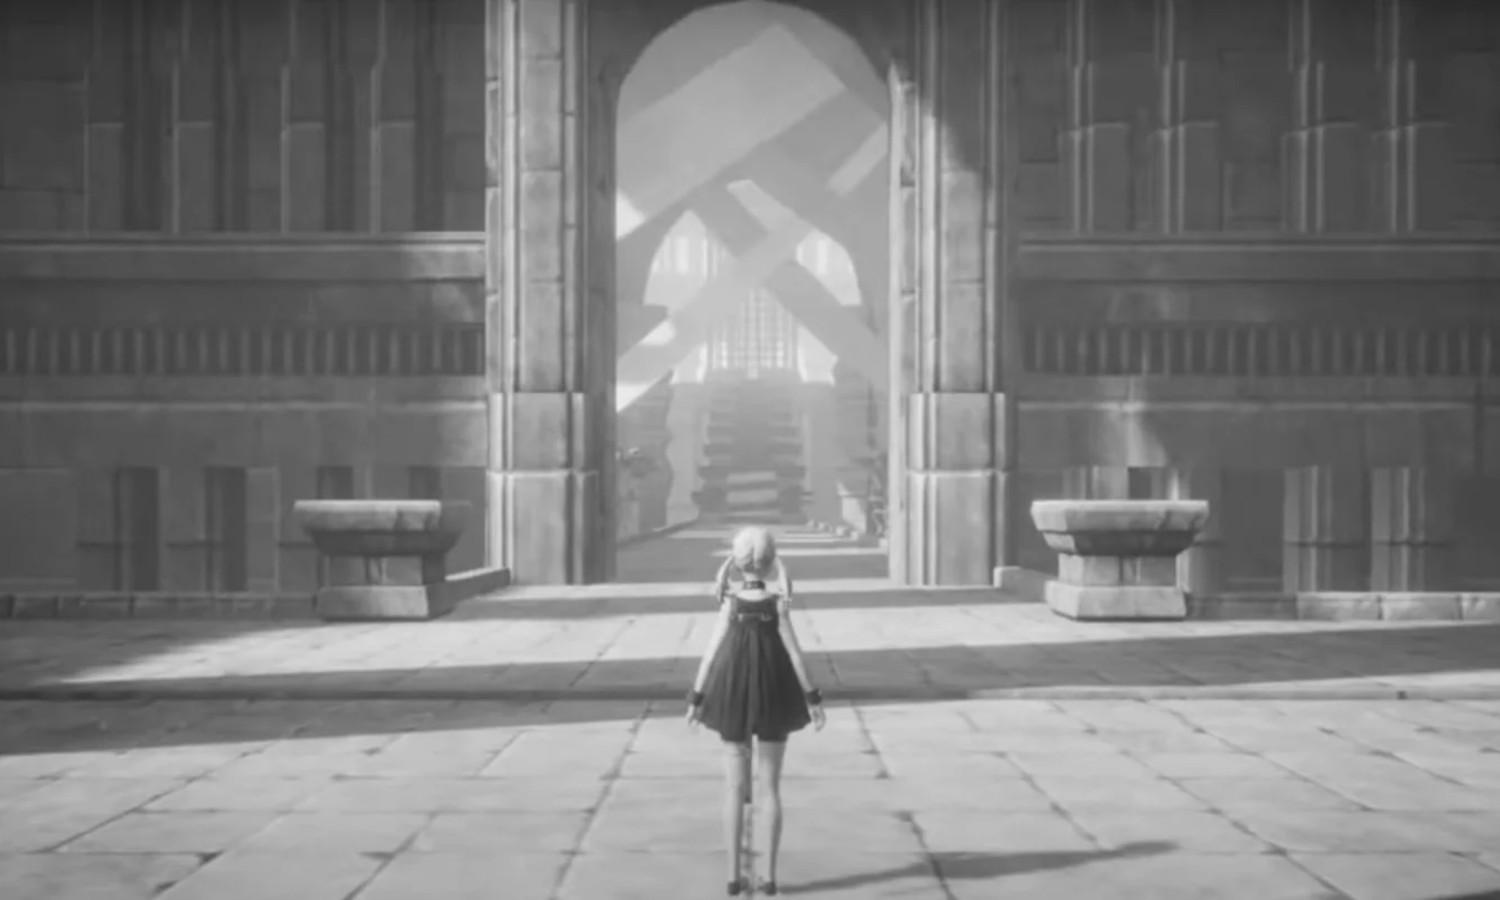 NieR Reincarnation – the mobile RPG that will transport you to a world of adventure and mystery!